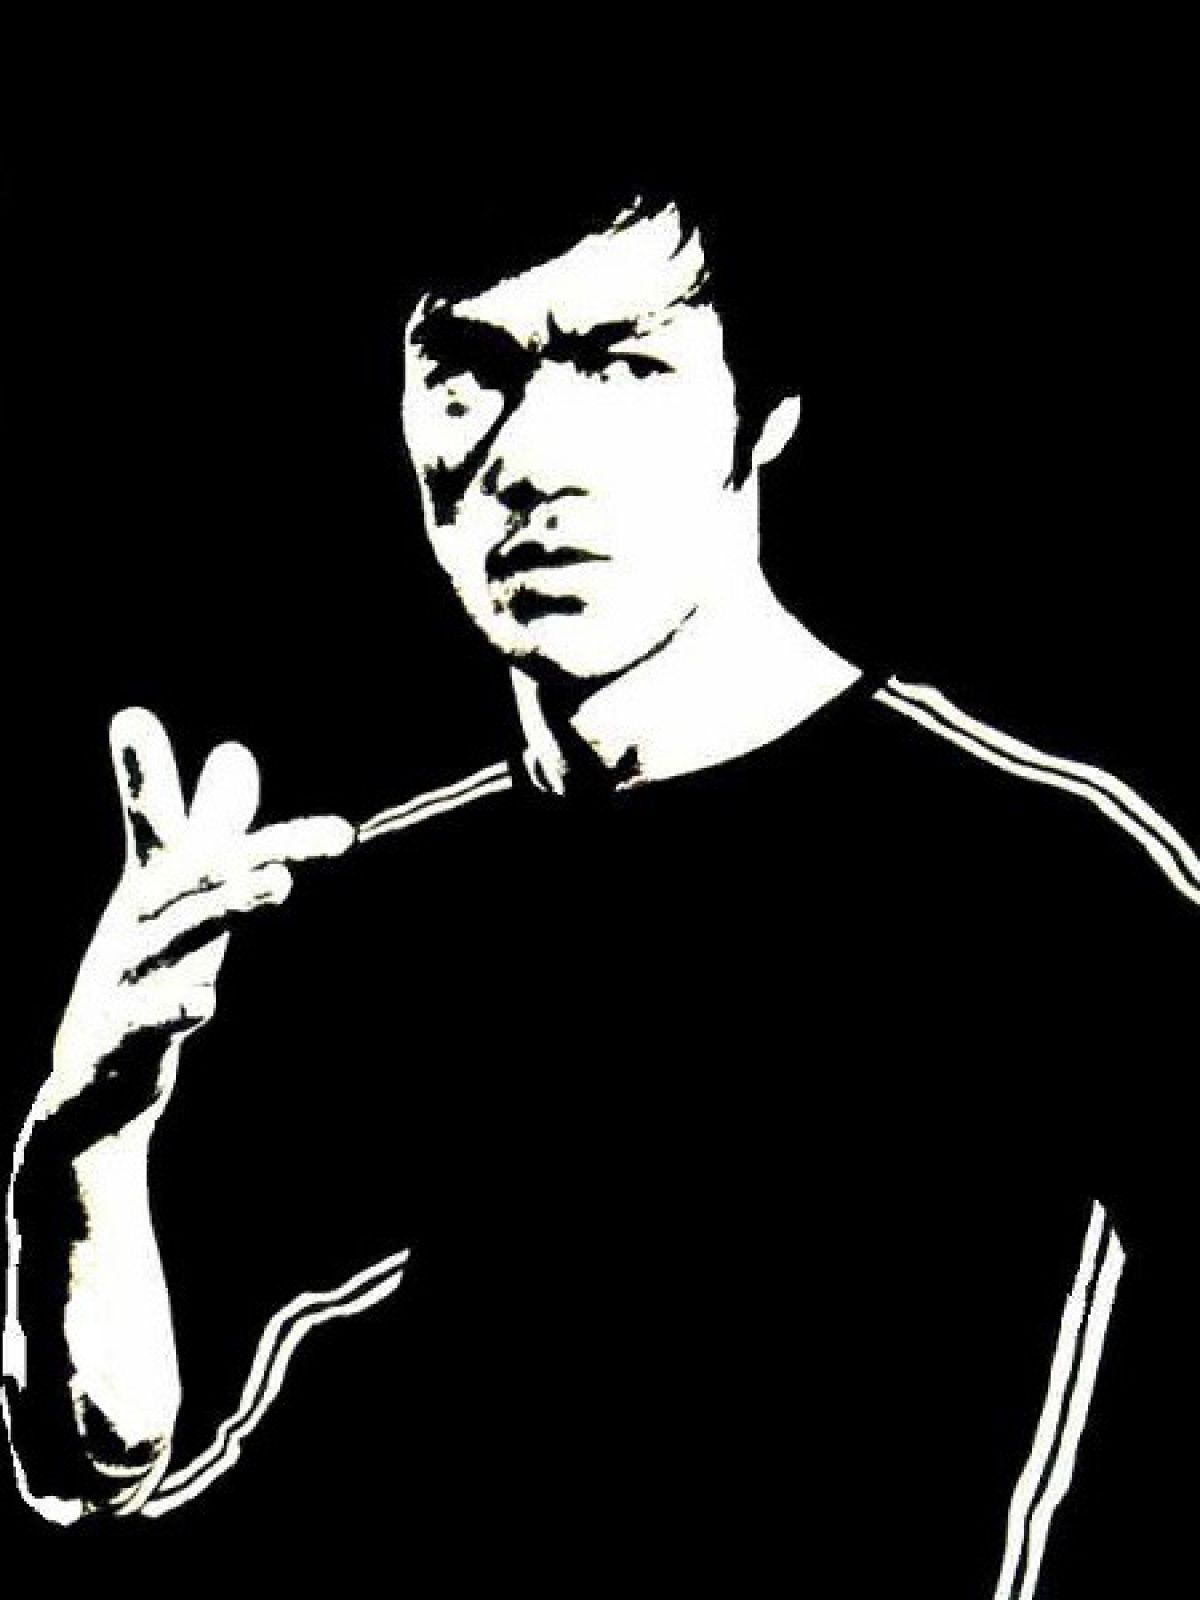 Latest Bruce Lee Wallpaper Android FULL HD 1920×1080 For PC Background. Bruce lee, Bruce lee photo, Bruce lee martial arts